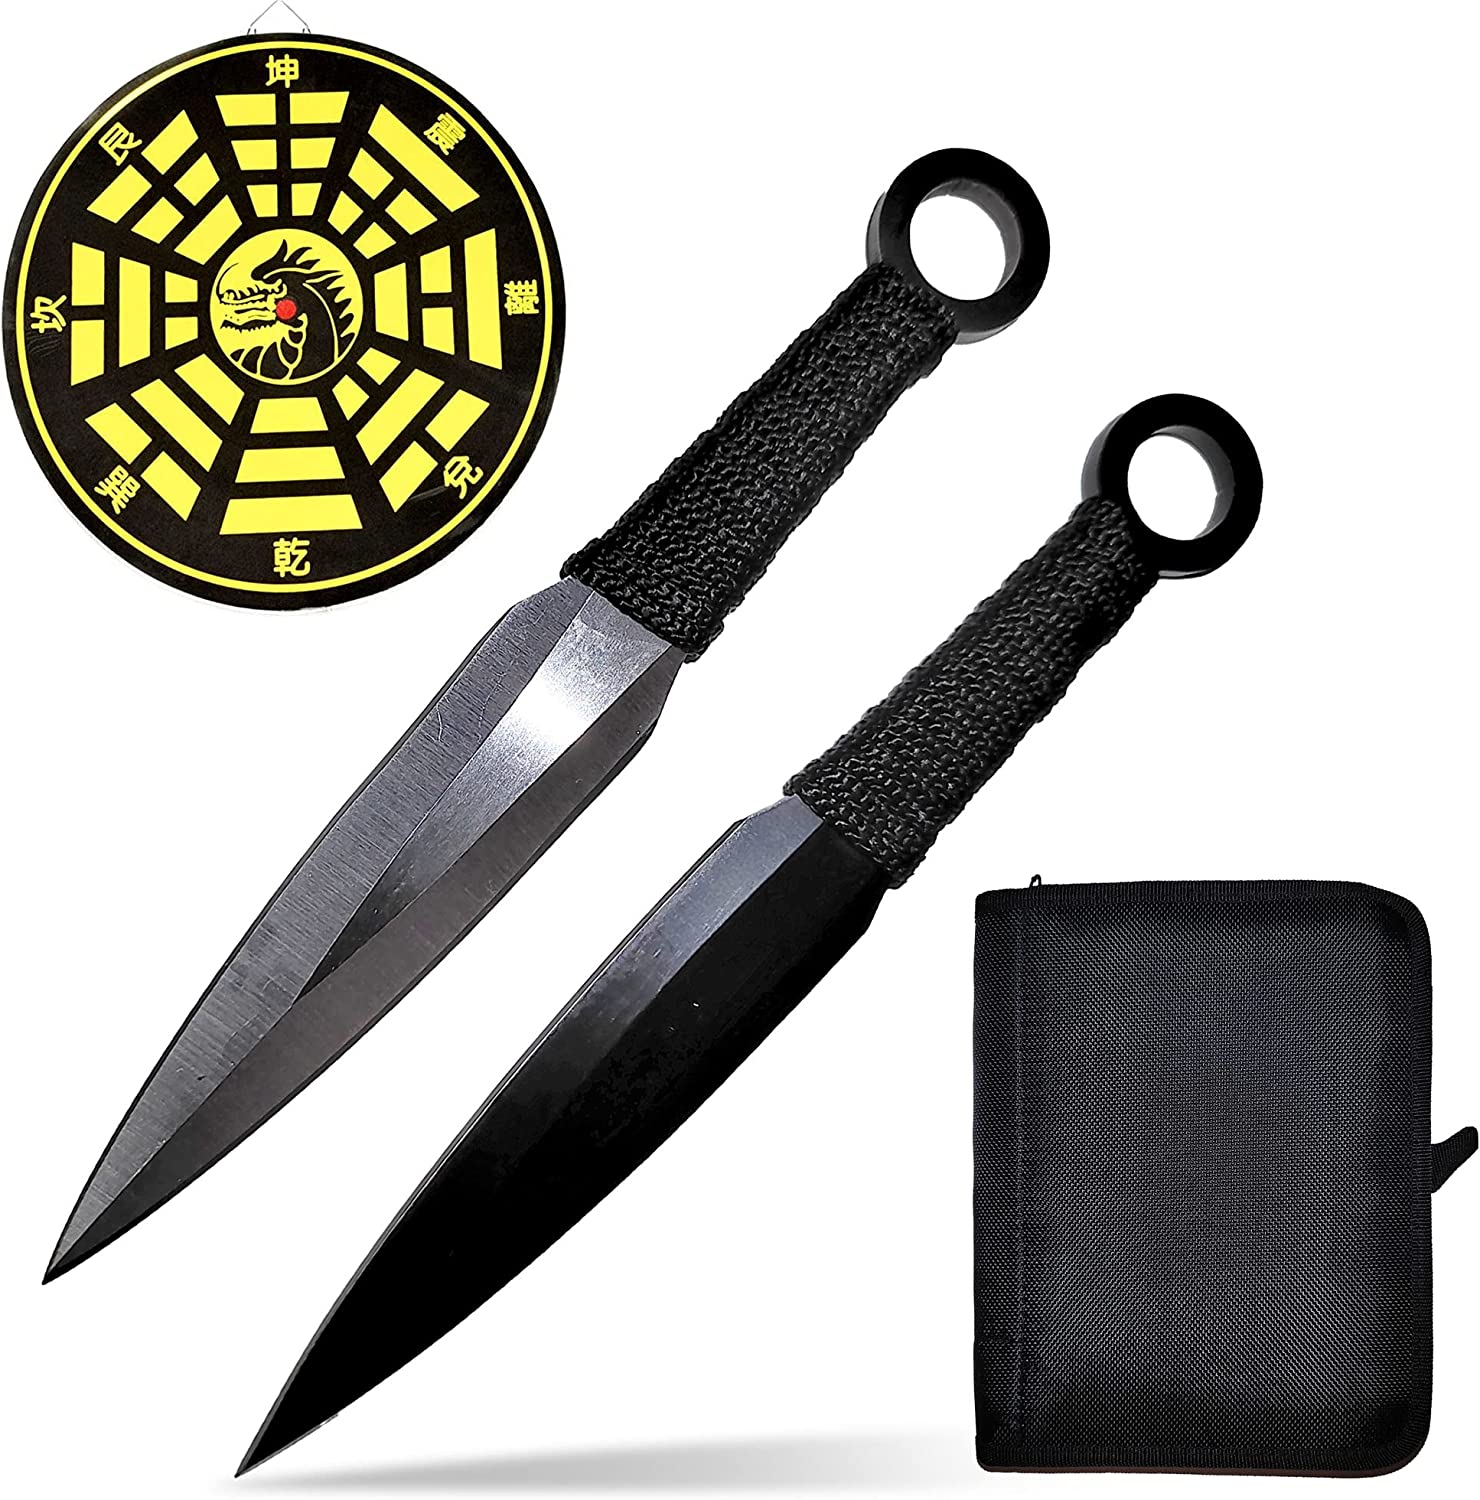 12 black and silver throwing knives with target